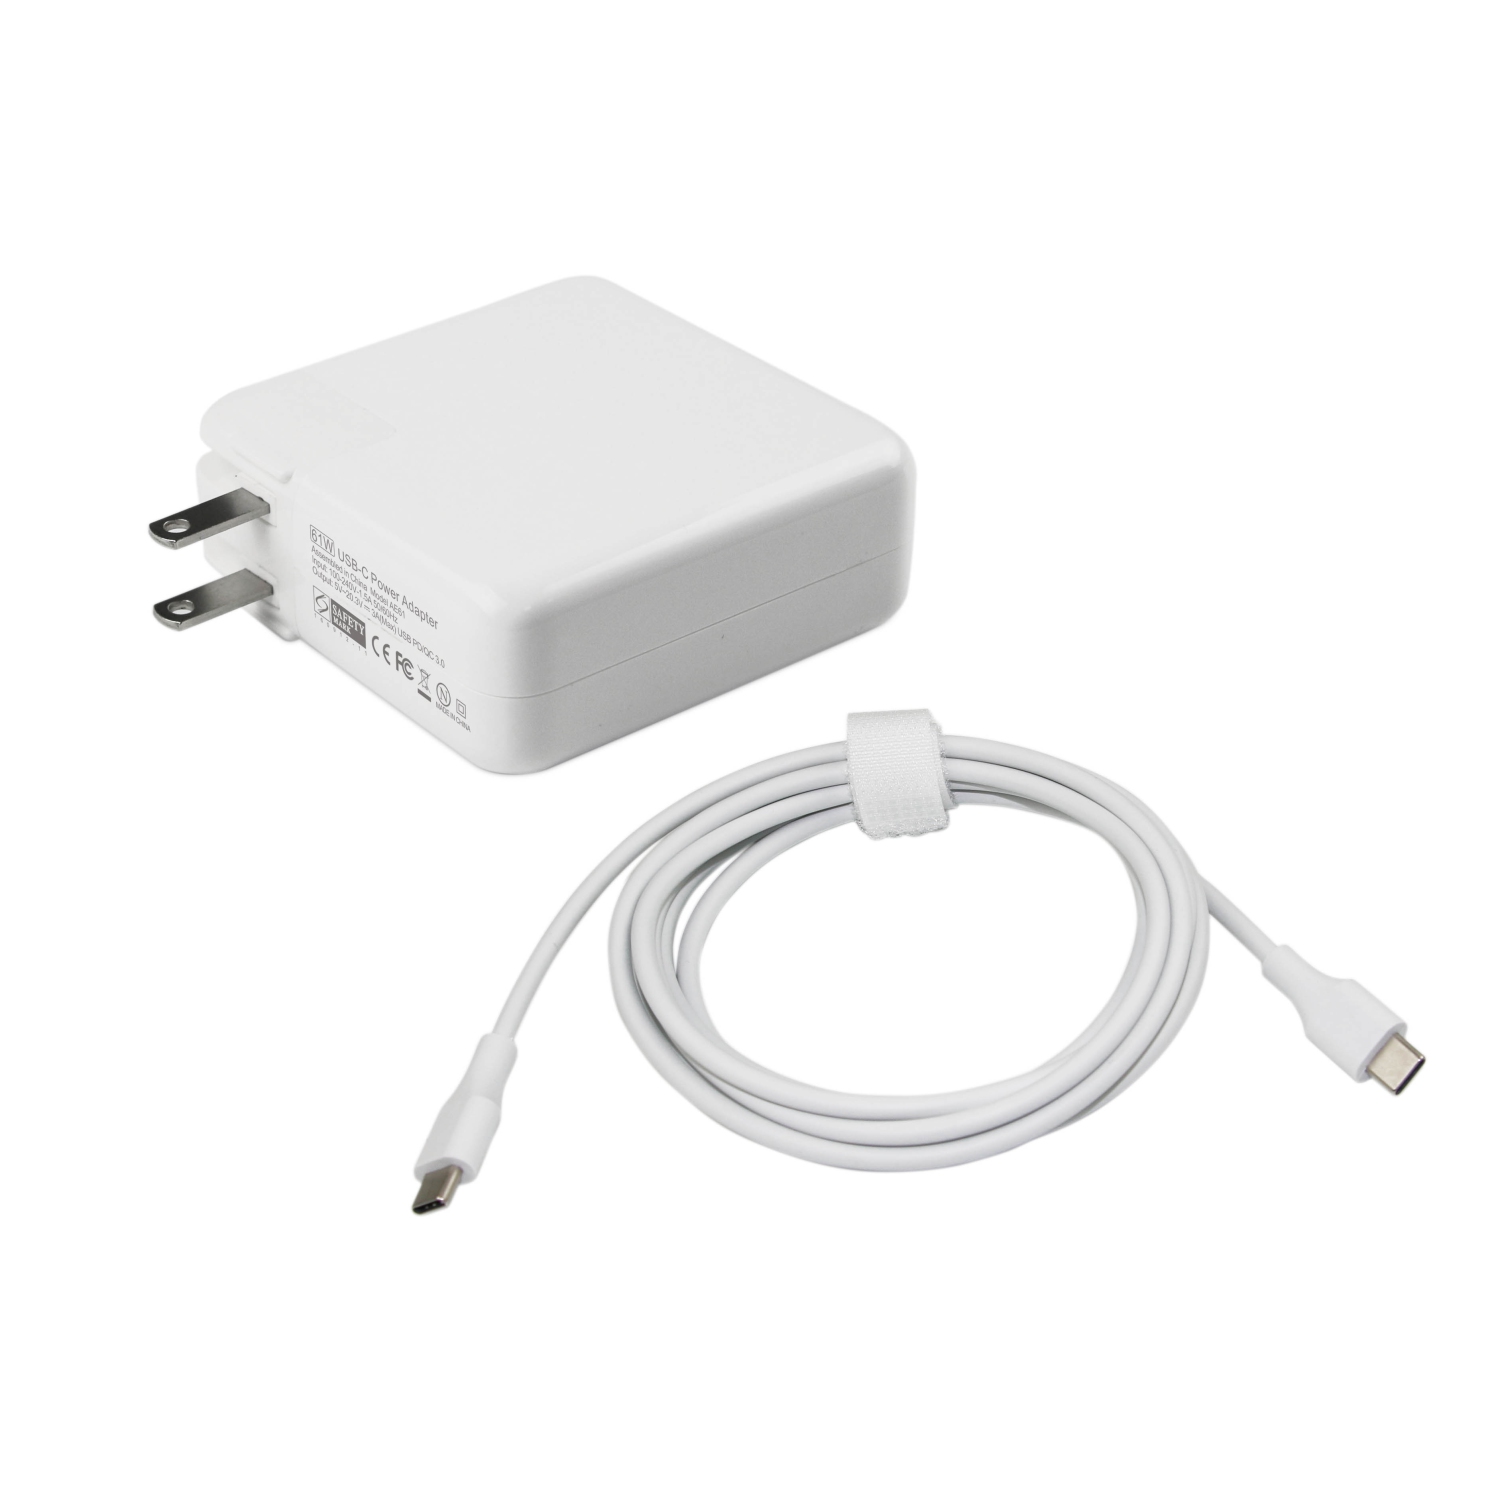 61W USB-C Charger Power Supply Wall Adapter, Compatible MacBook/Pro, Samsung, Nintendo Swith Other Devices USB-C Port